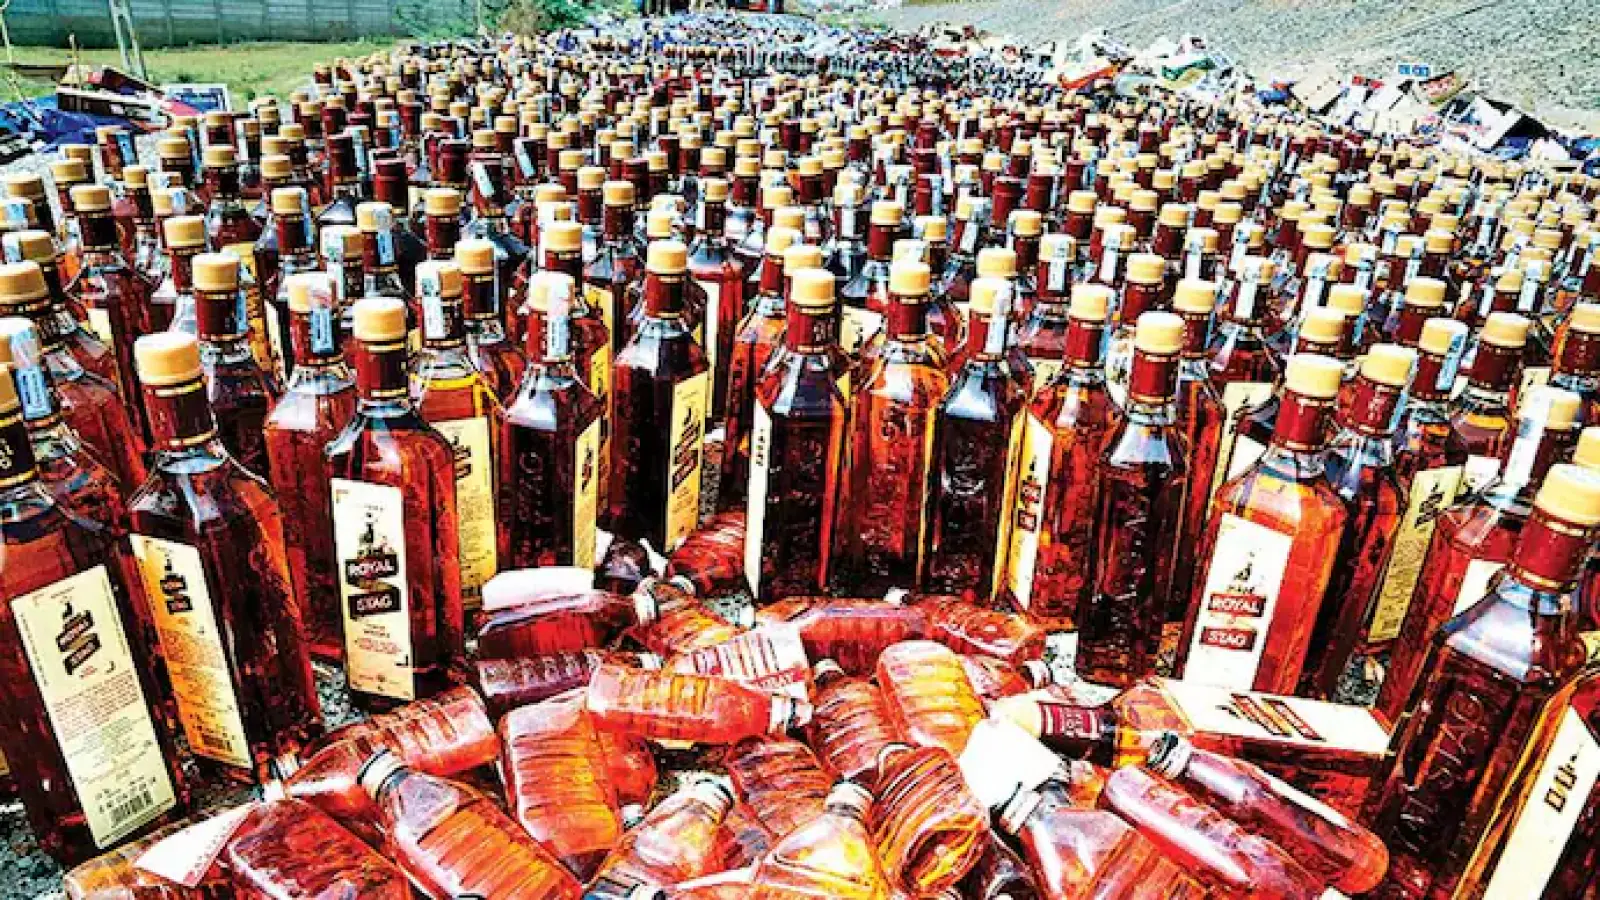 Sakti: Illegal liquor business is flourishing due to police negligence, furnaces are burning in the camps of poor people